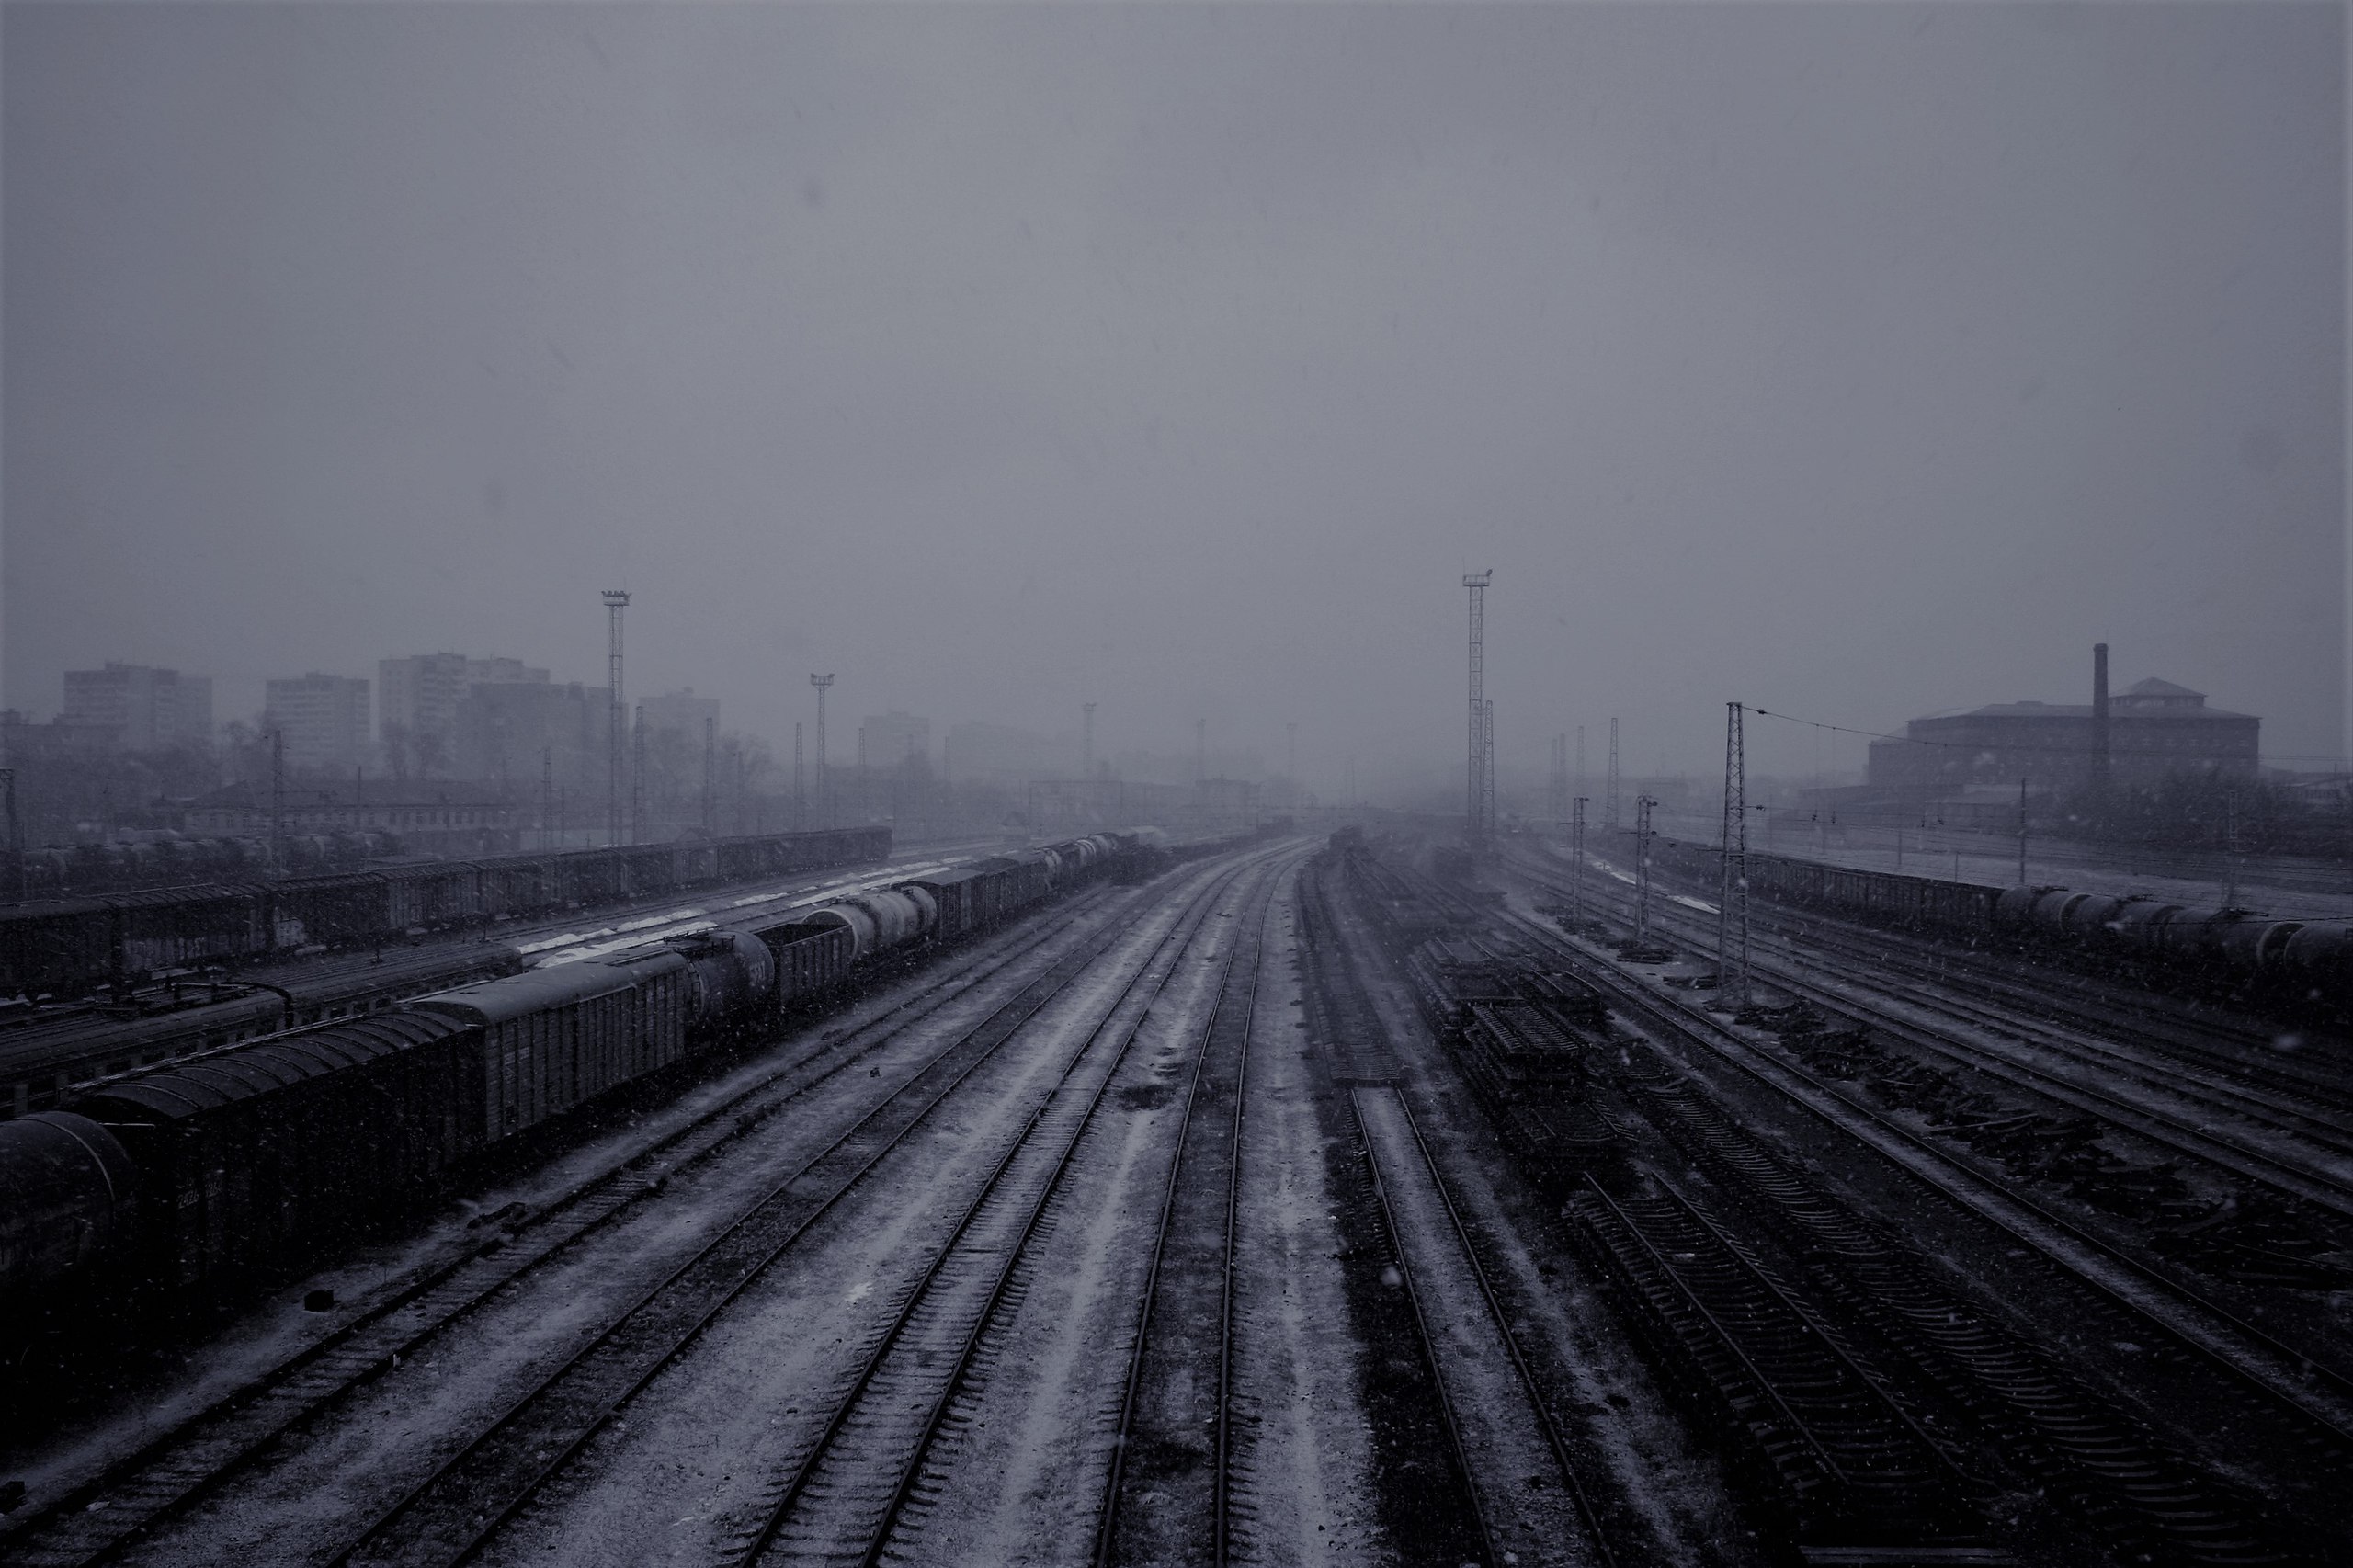 General 2560x1706 train winter mist loneliness Russia railway city house faded morning